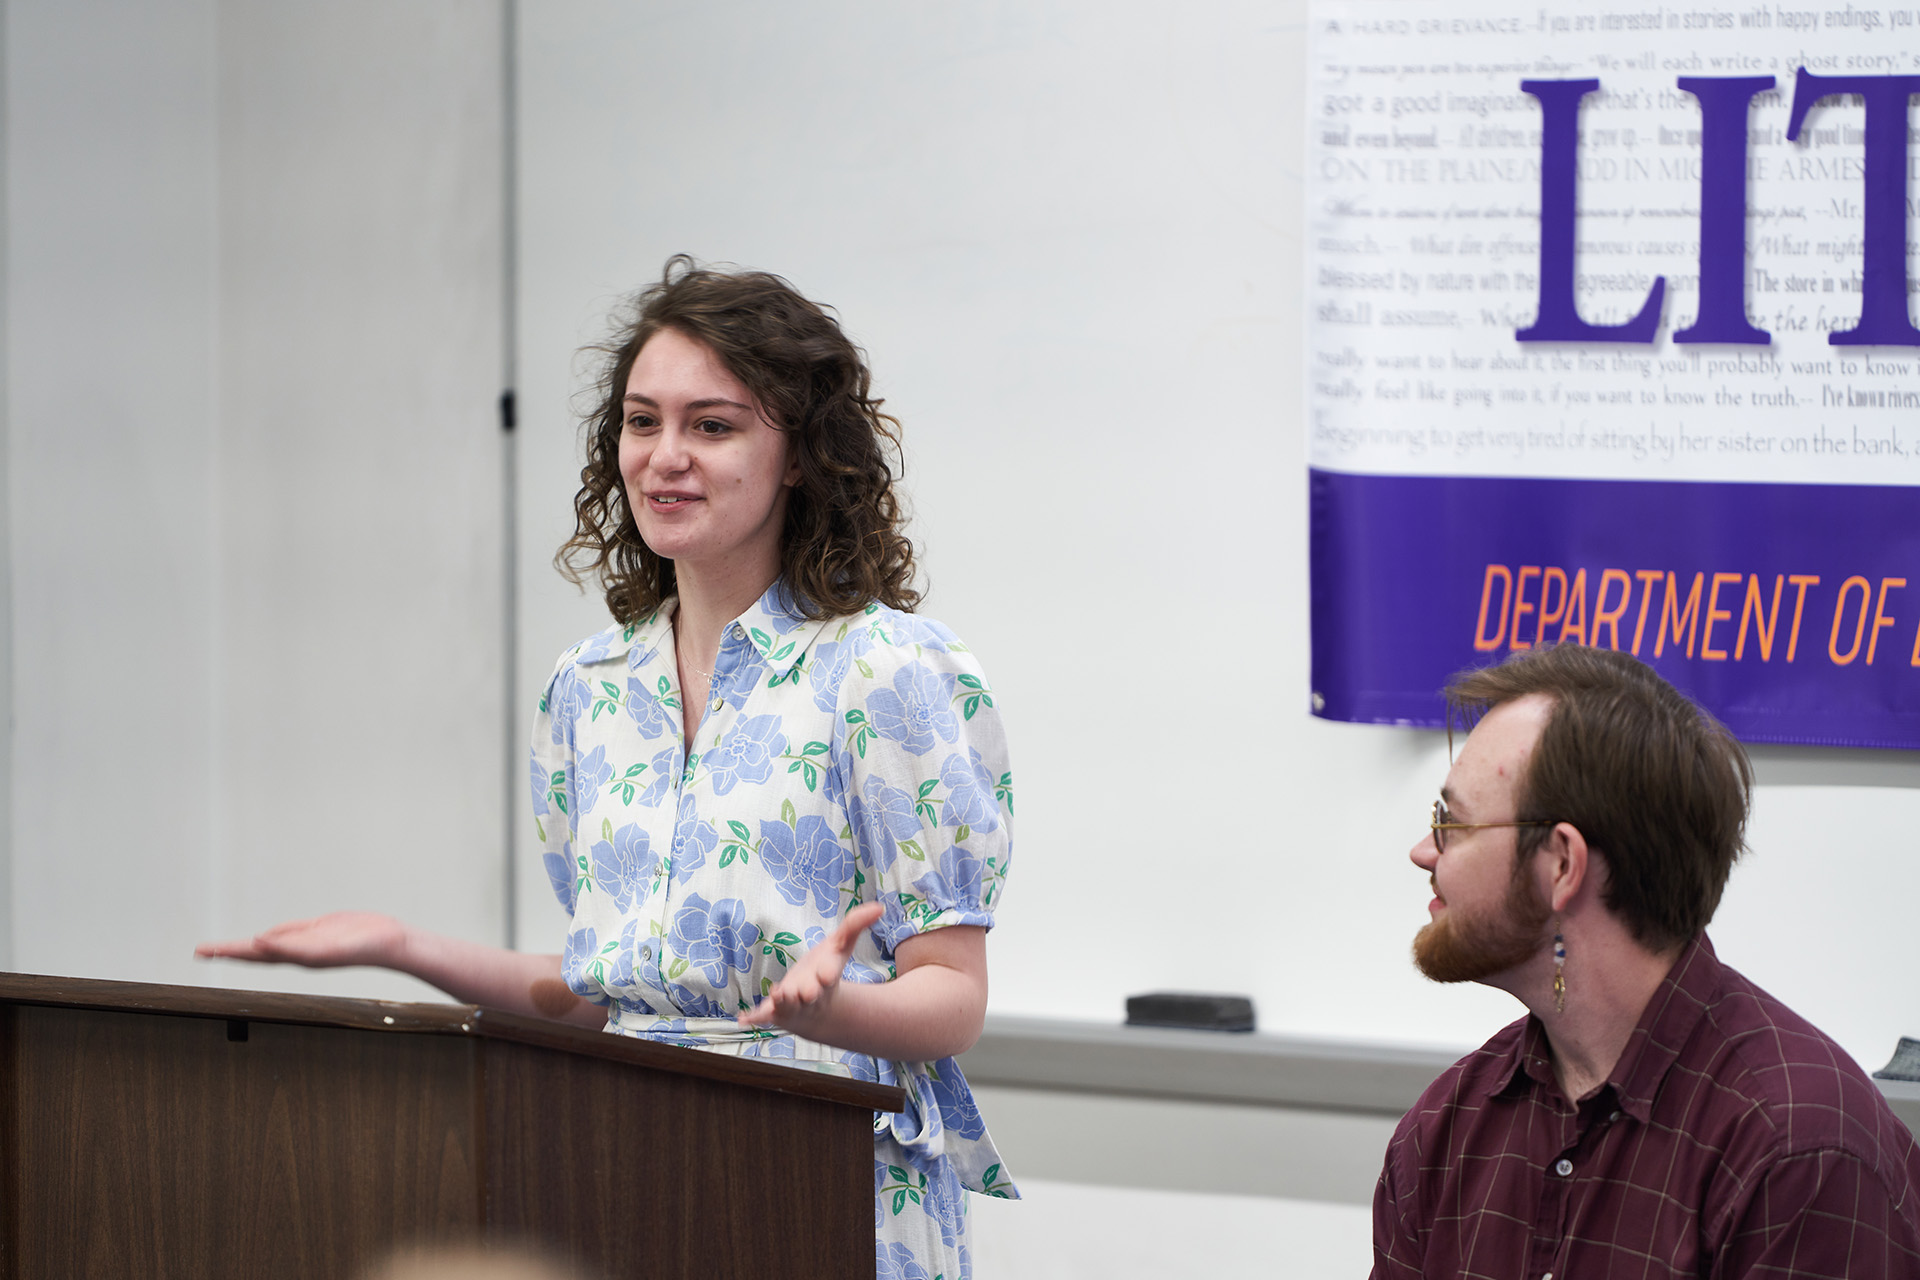 Madison Conway speaks while fellow presenter McAllister Stowall listens during the “Topics in Gender and Sexuality” Panel.